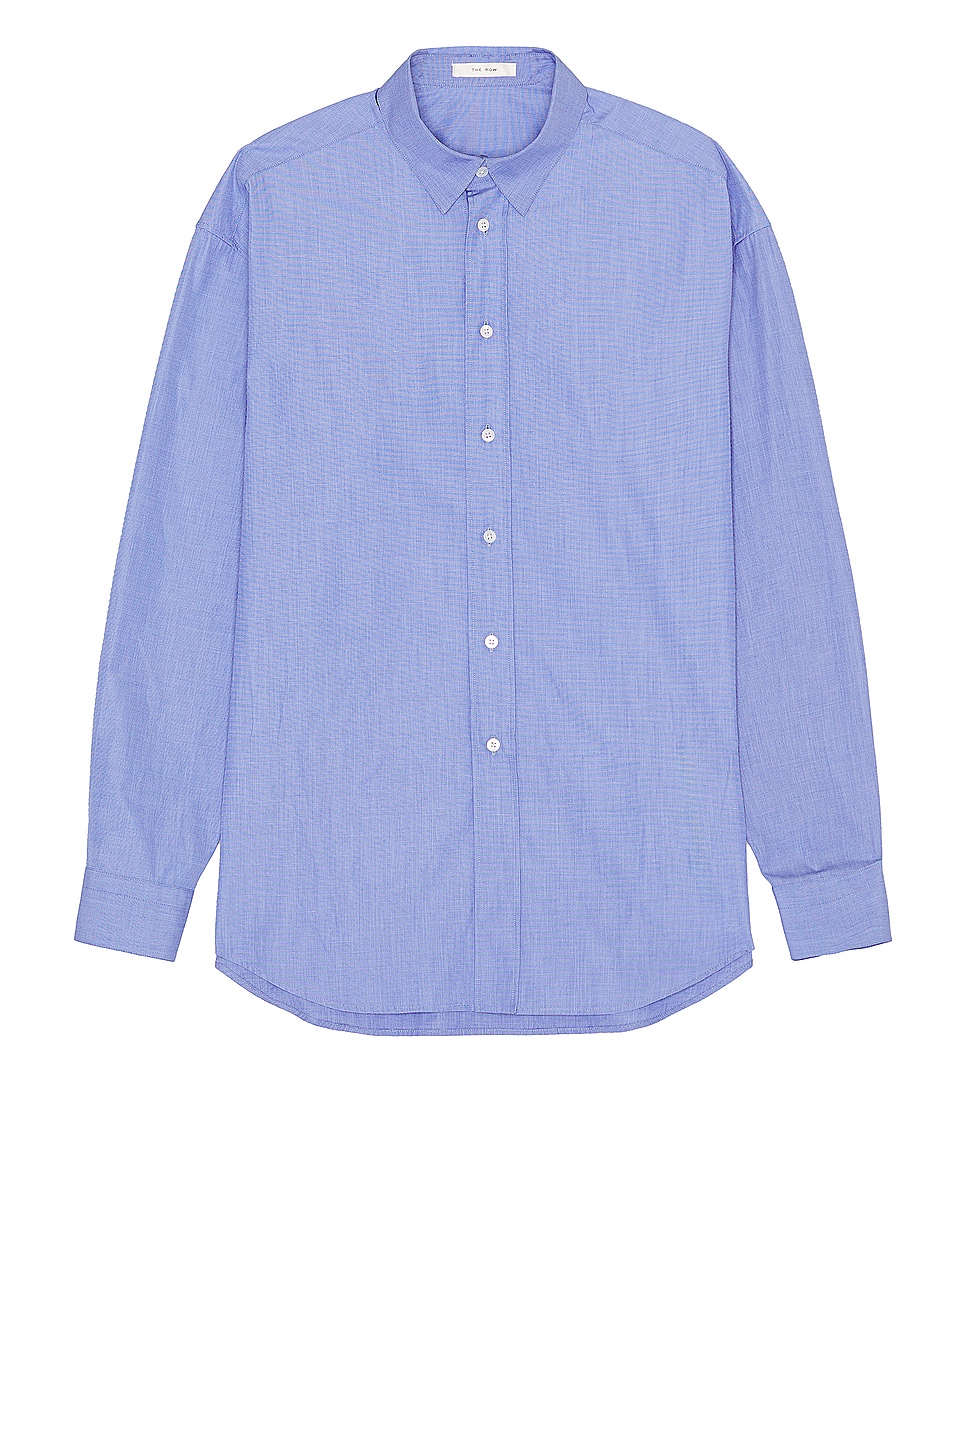 Image 1 of The Row Miller Shirt in Oxford Blue